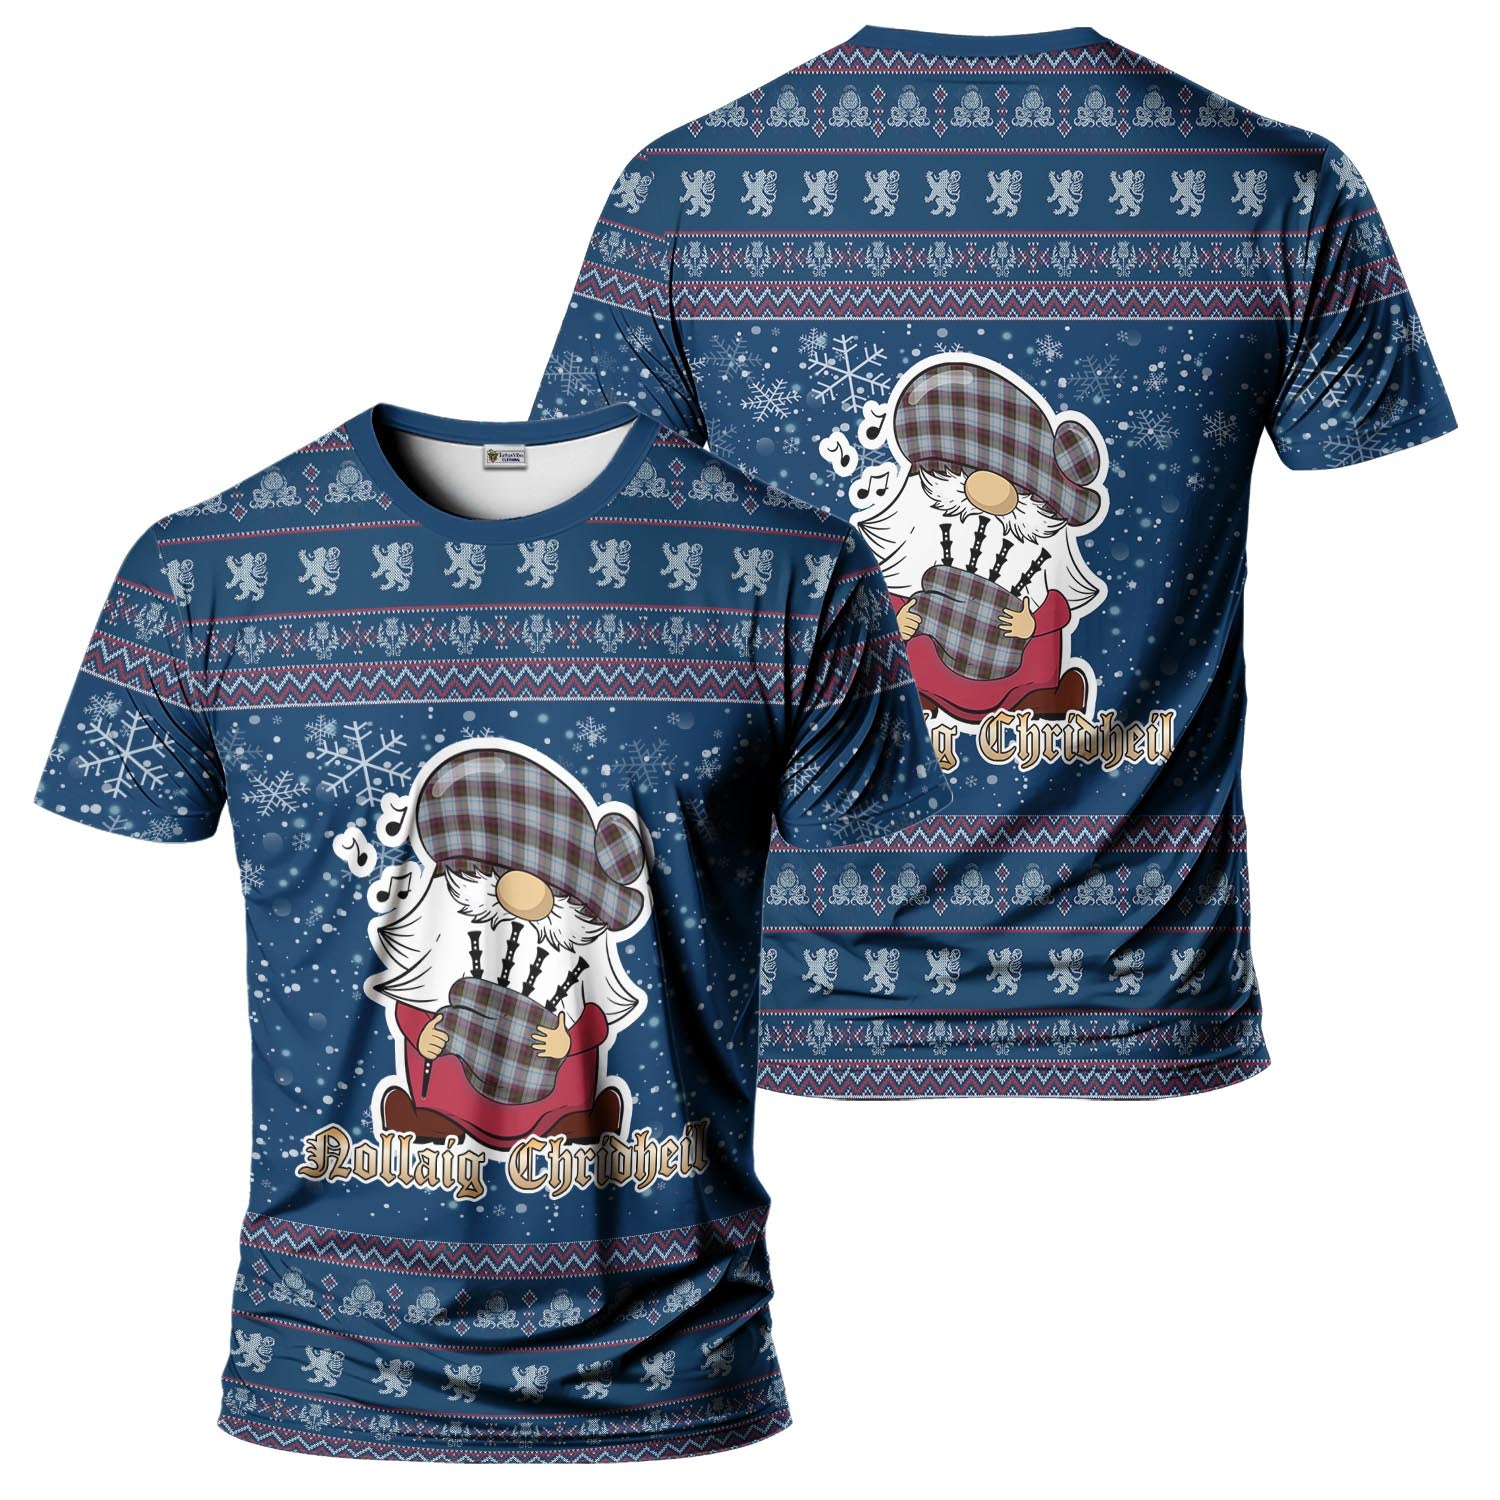 MacDonald Dress Ancient Clan Christmas Family T-Shirt with Funny Gnome Playing Bagpipes Kid's Shirt Blue - Tartanvibesclothing